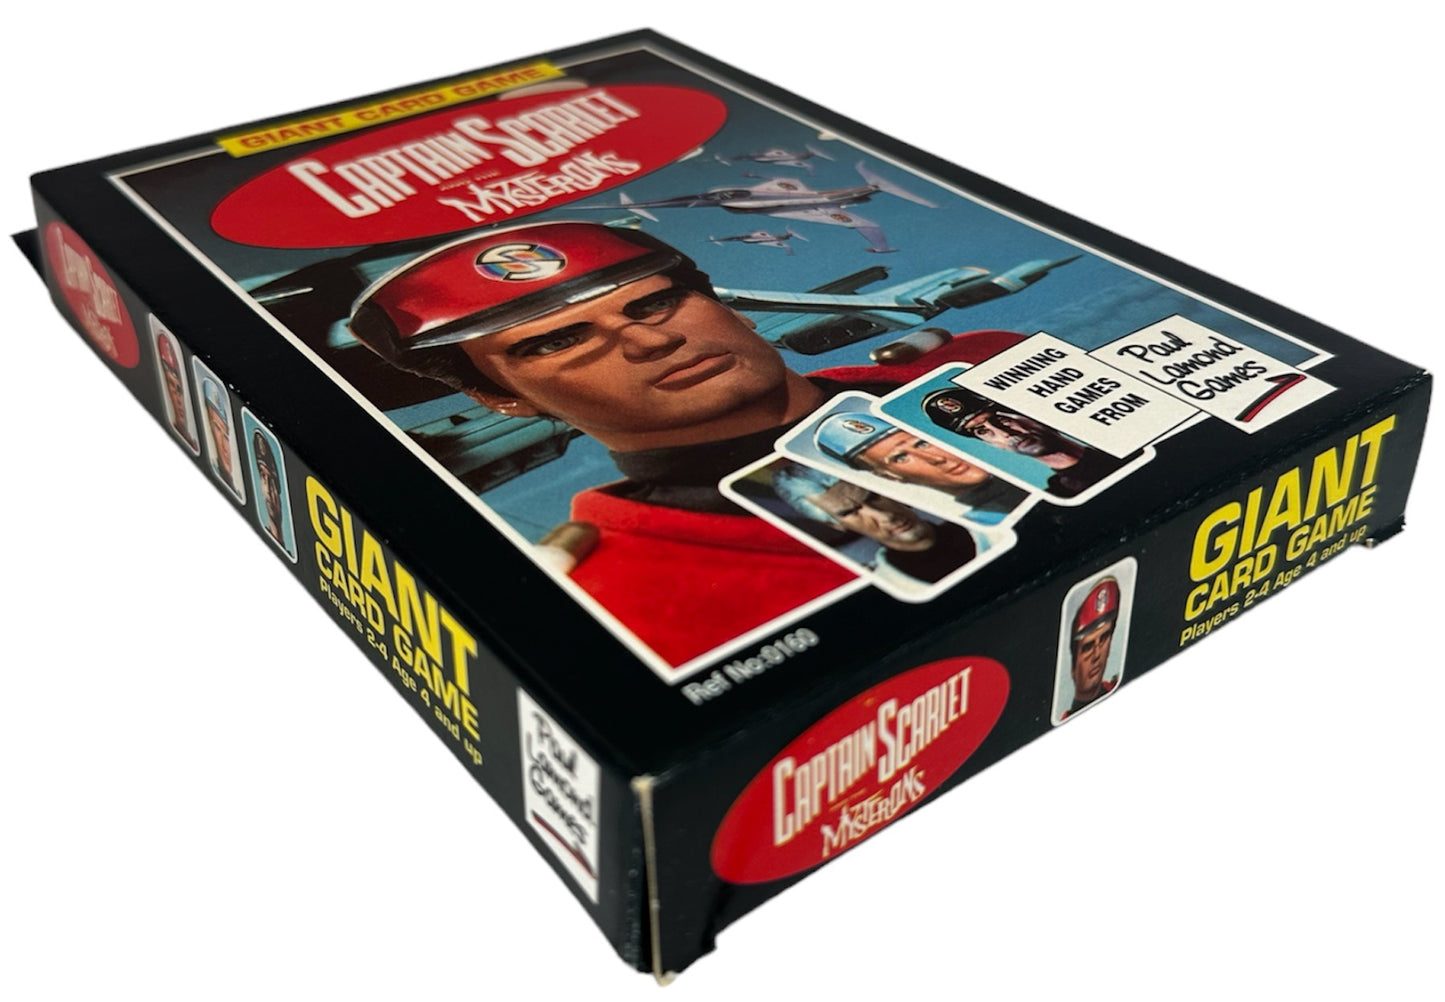 Vintage PL Games 1993 Gerry Andersons Captain Scarlet And The Mysterons Giant Card Game - Shop Stock Room Find